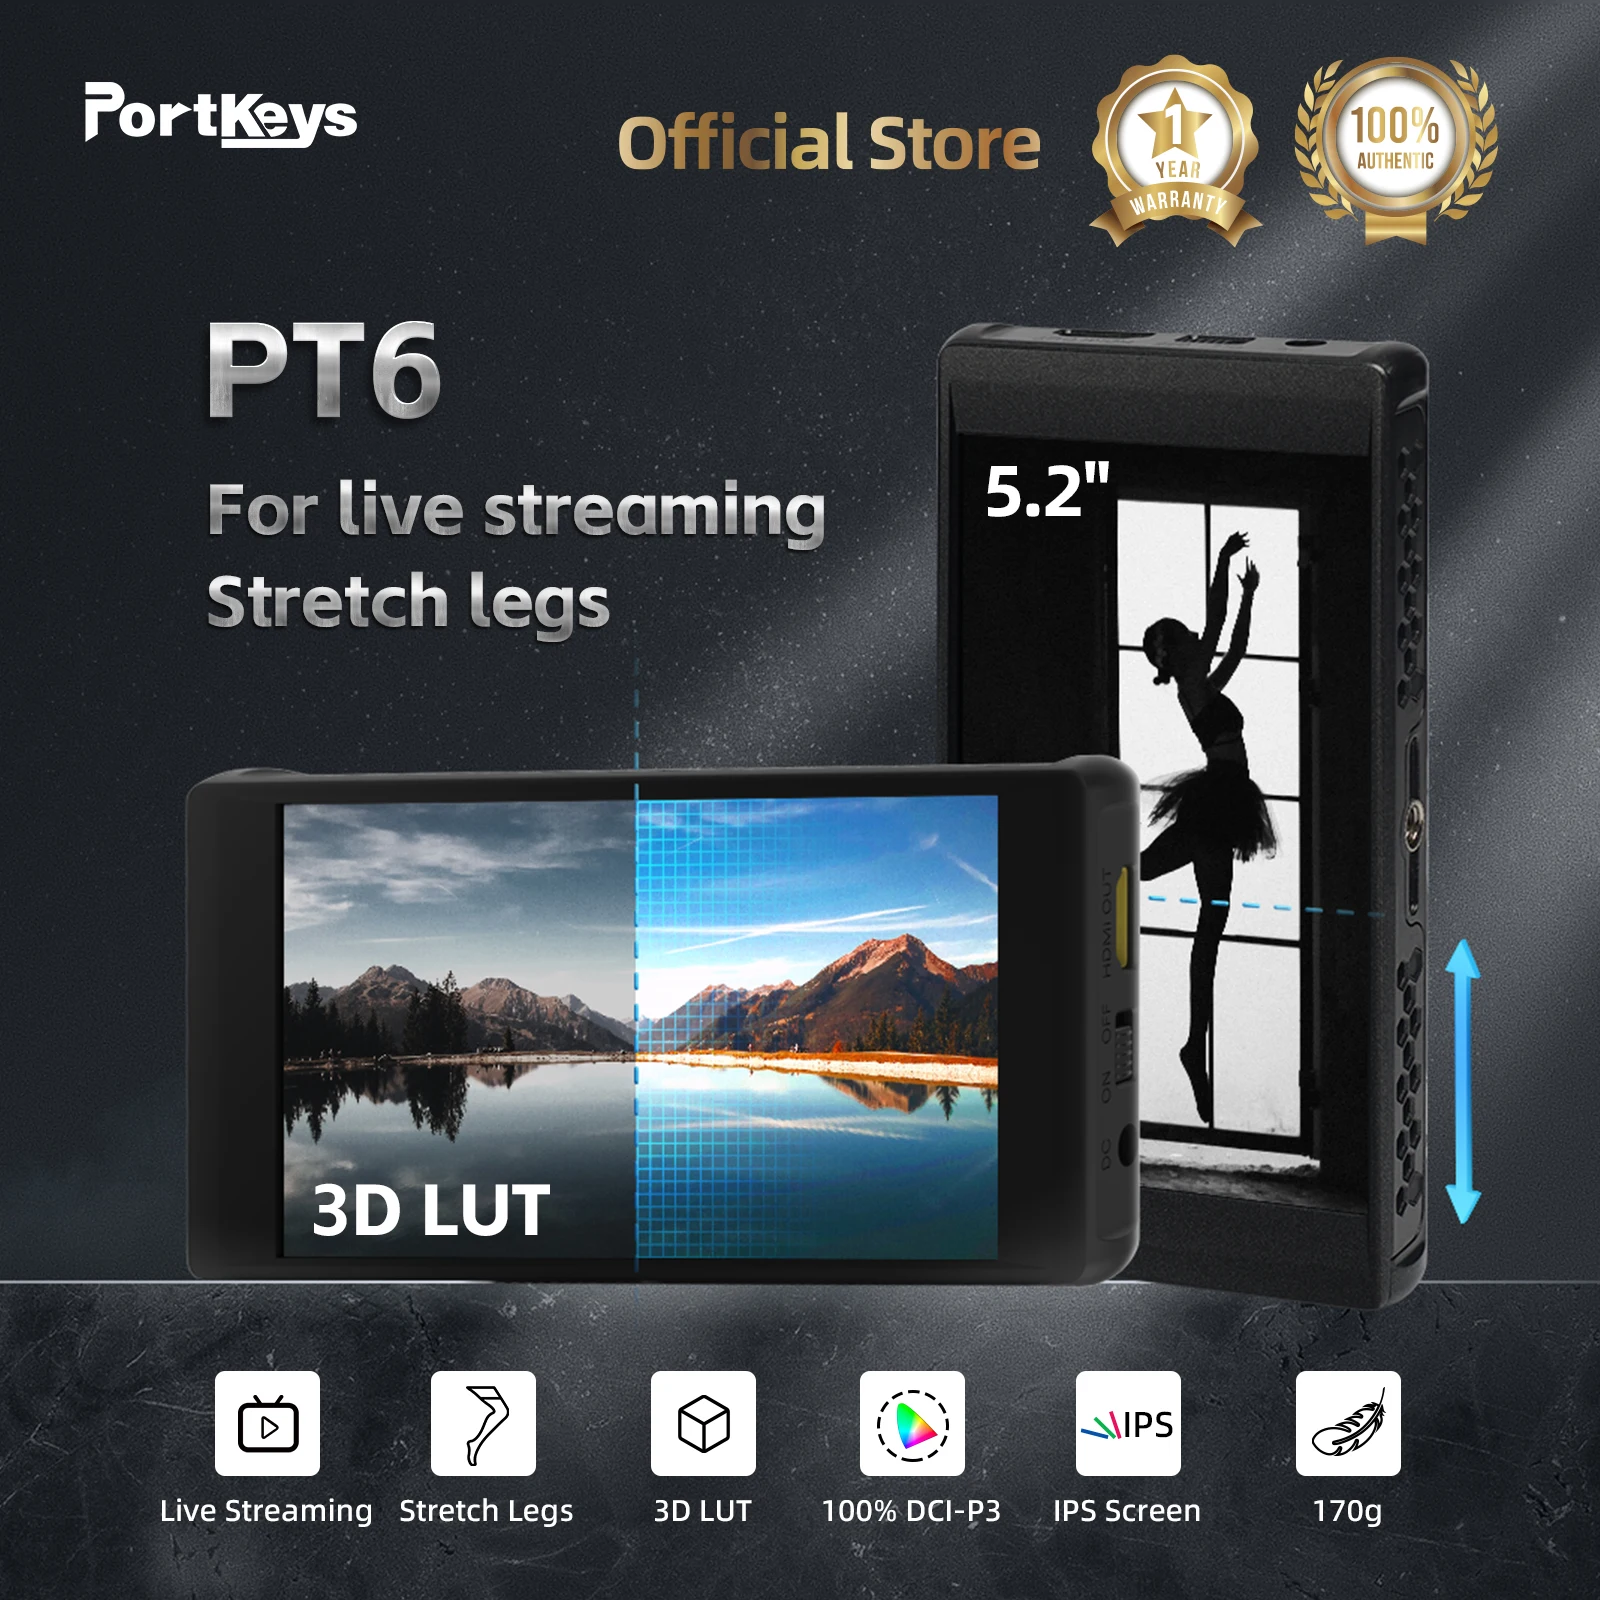 

Portkeys PT6 5.2 Inch Portable HDMI Monitor for Live Streaming 4K IPS Dslr Monitor with Stretch Legs 3D LUT Real-time Output